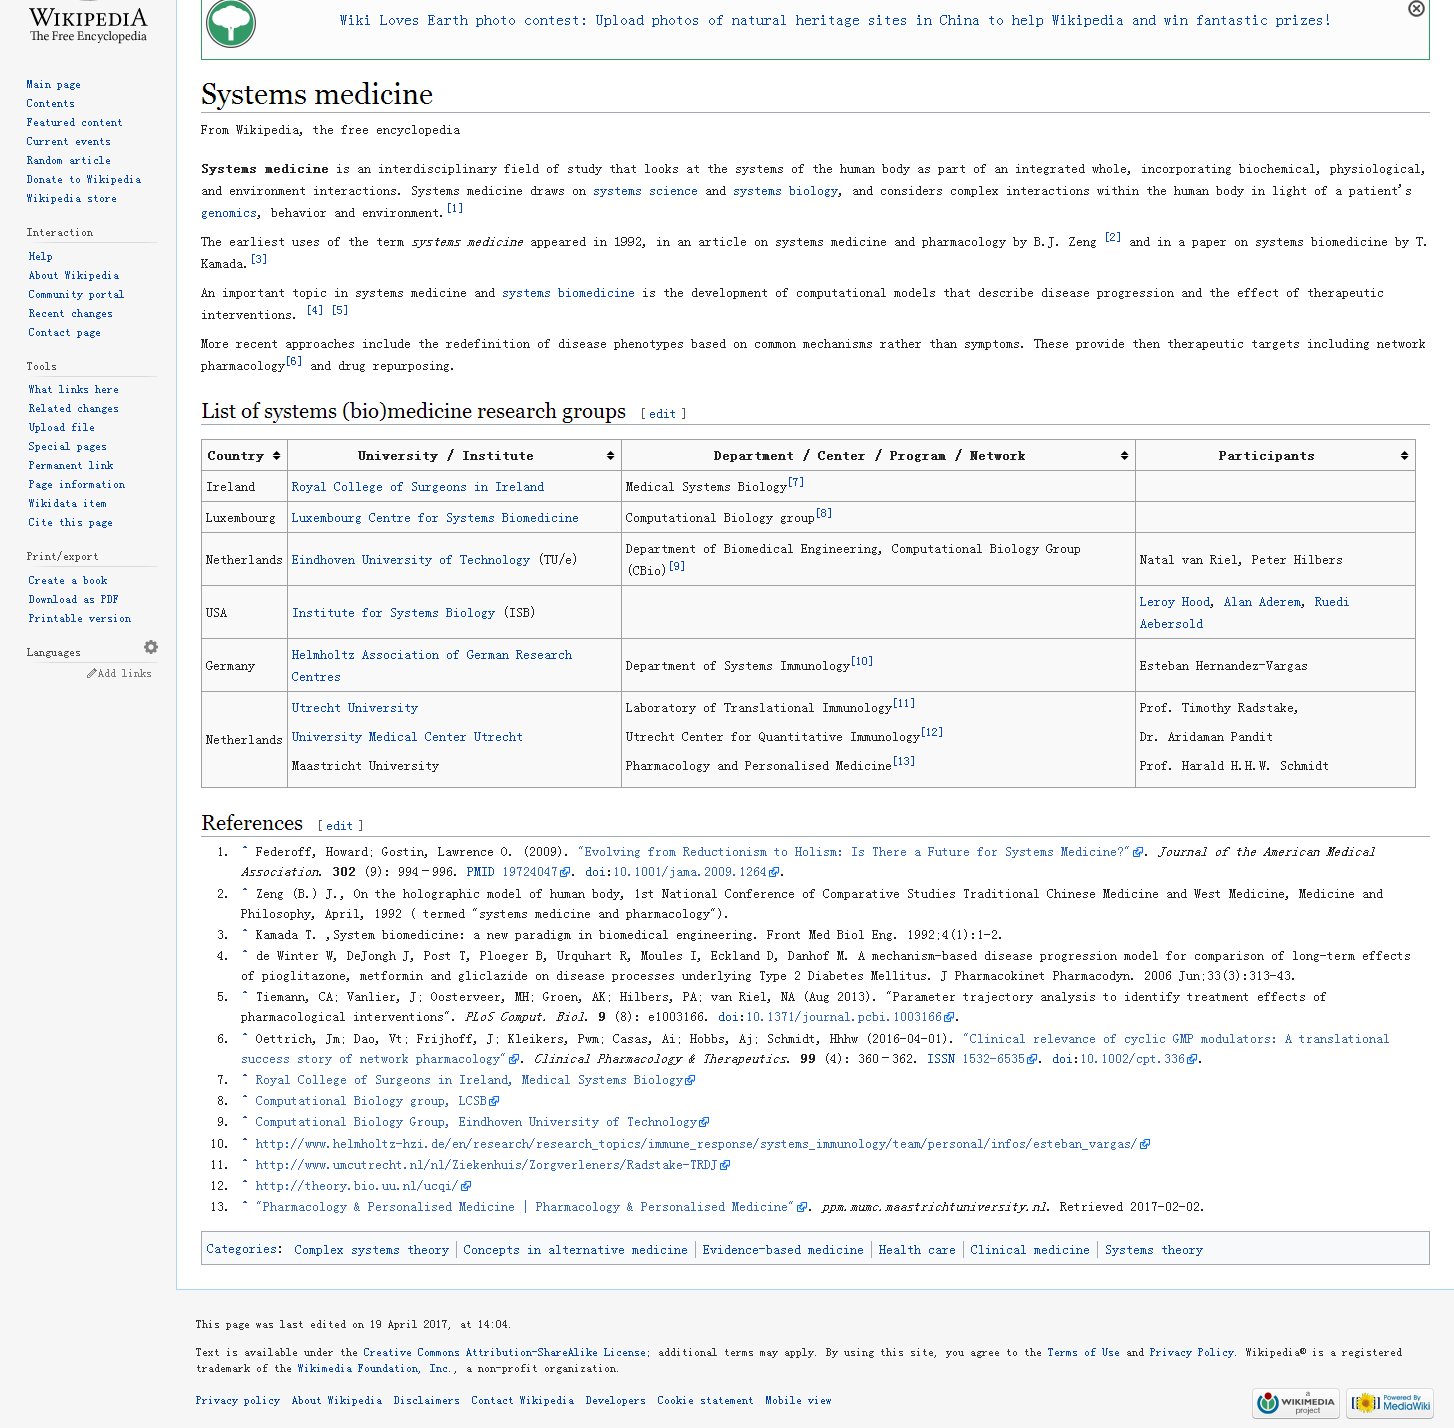 Systems medicine - Wikipedia-1.png